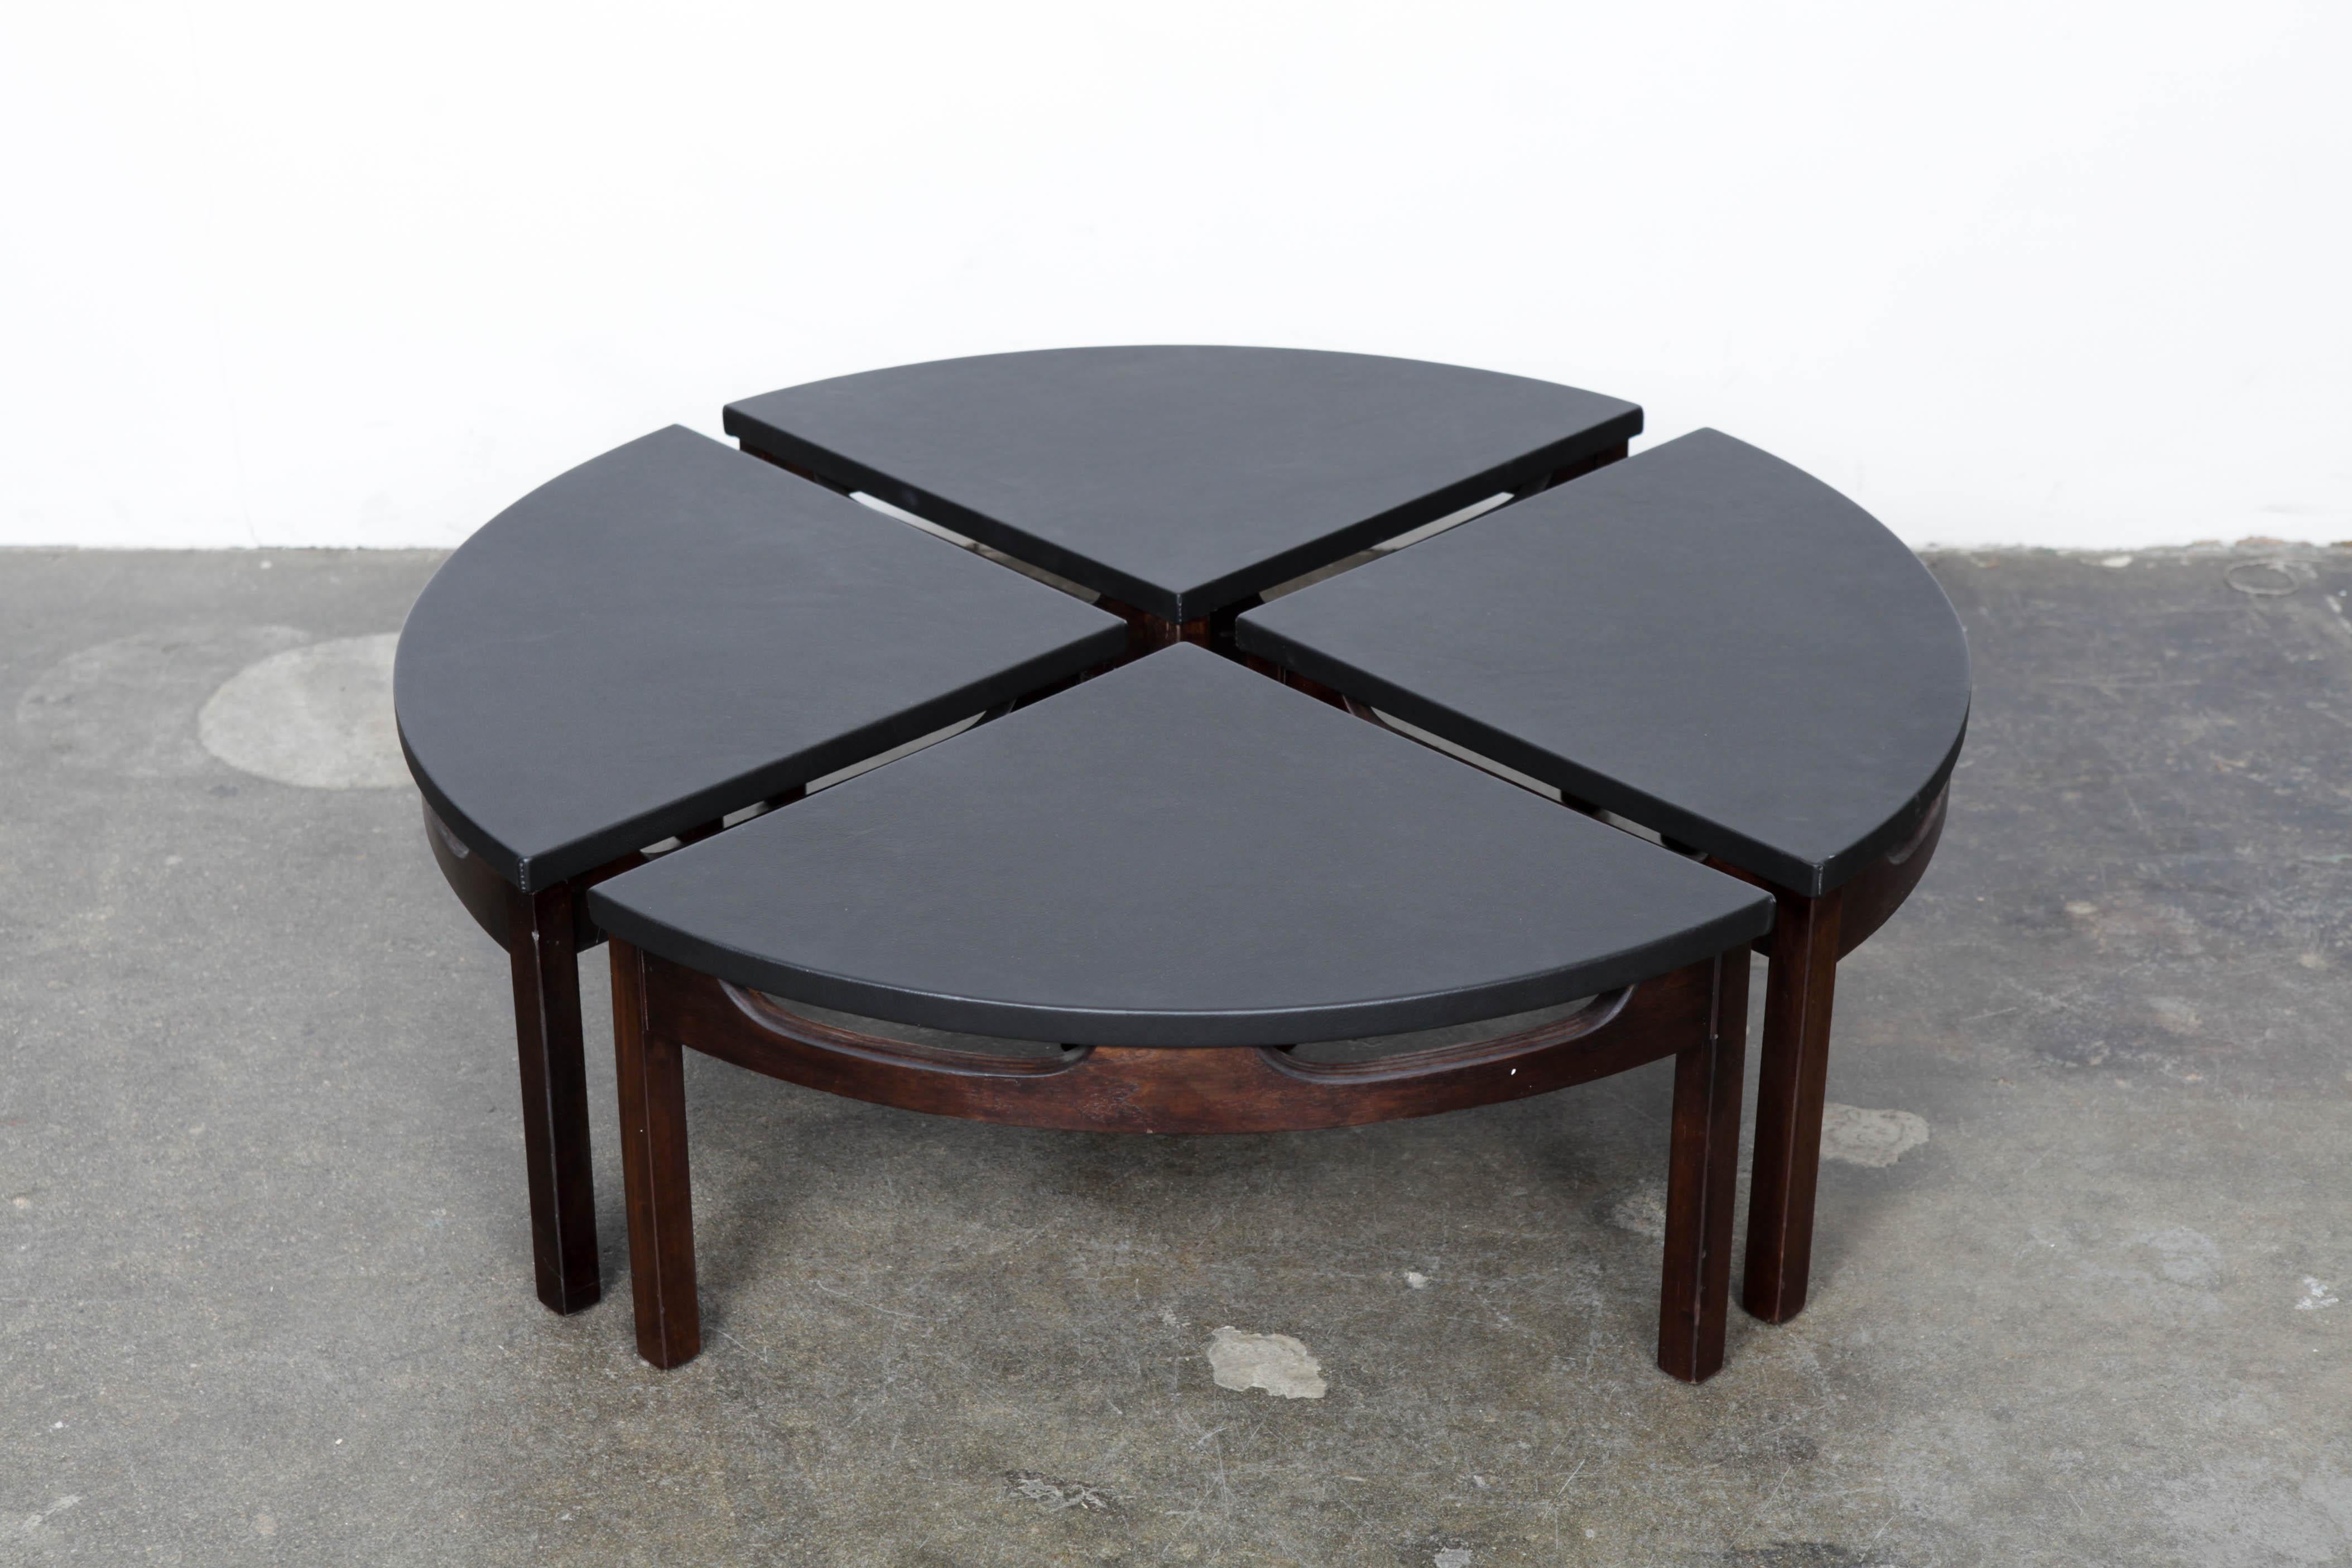 Unique walnut and leather top round coffee table, 1960s, that separates into 4 pie shaped individual table parts, USA. Leather was recently replaced and in excellent condition. Designer or maker unknown.